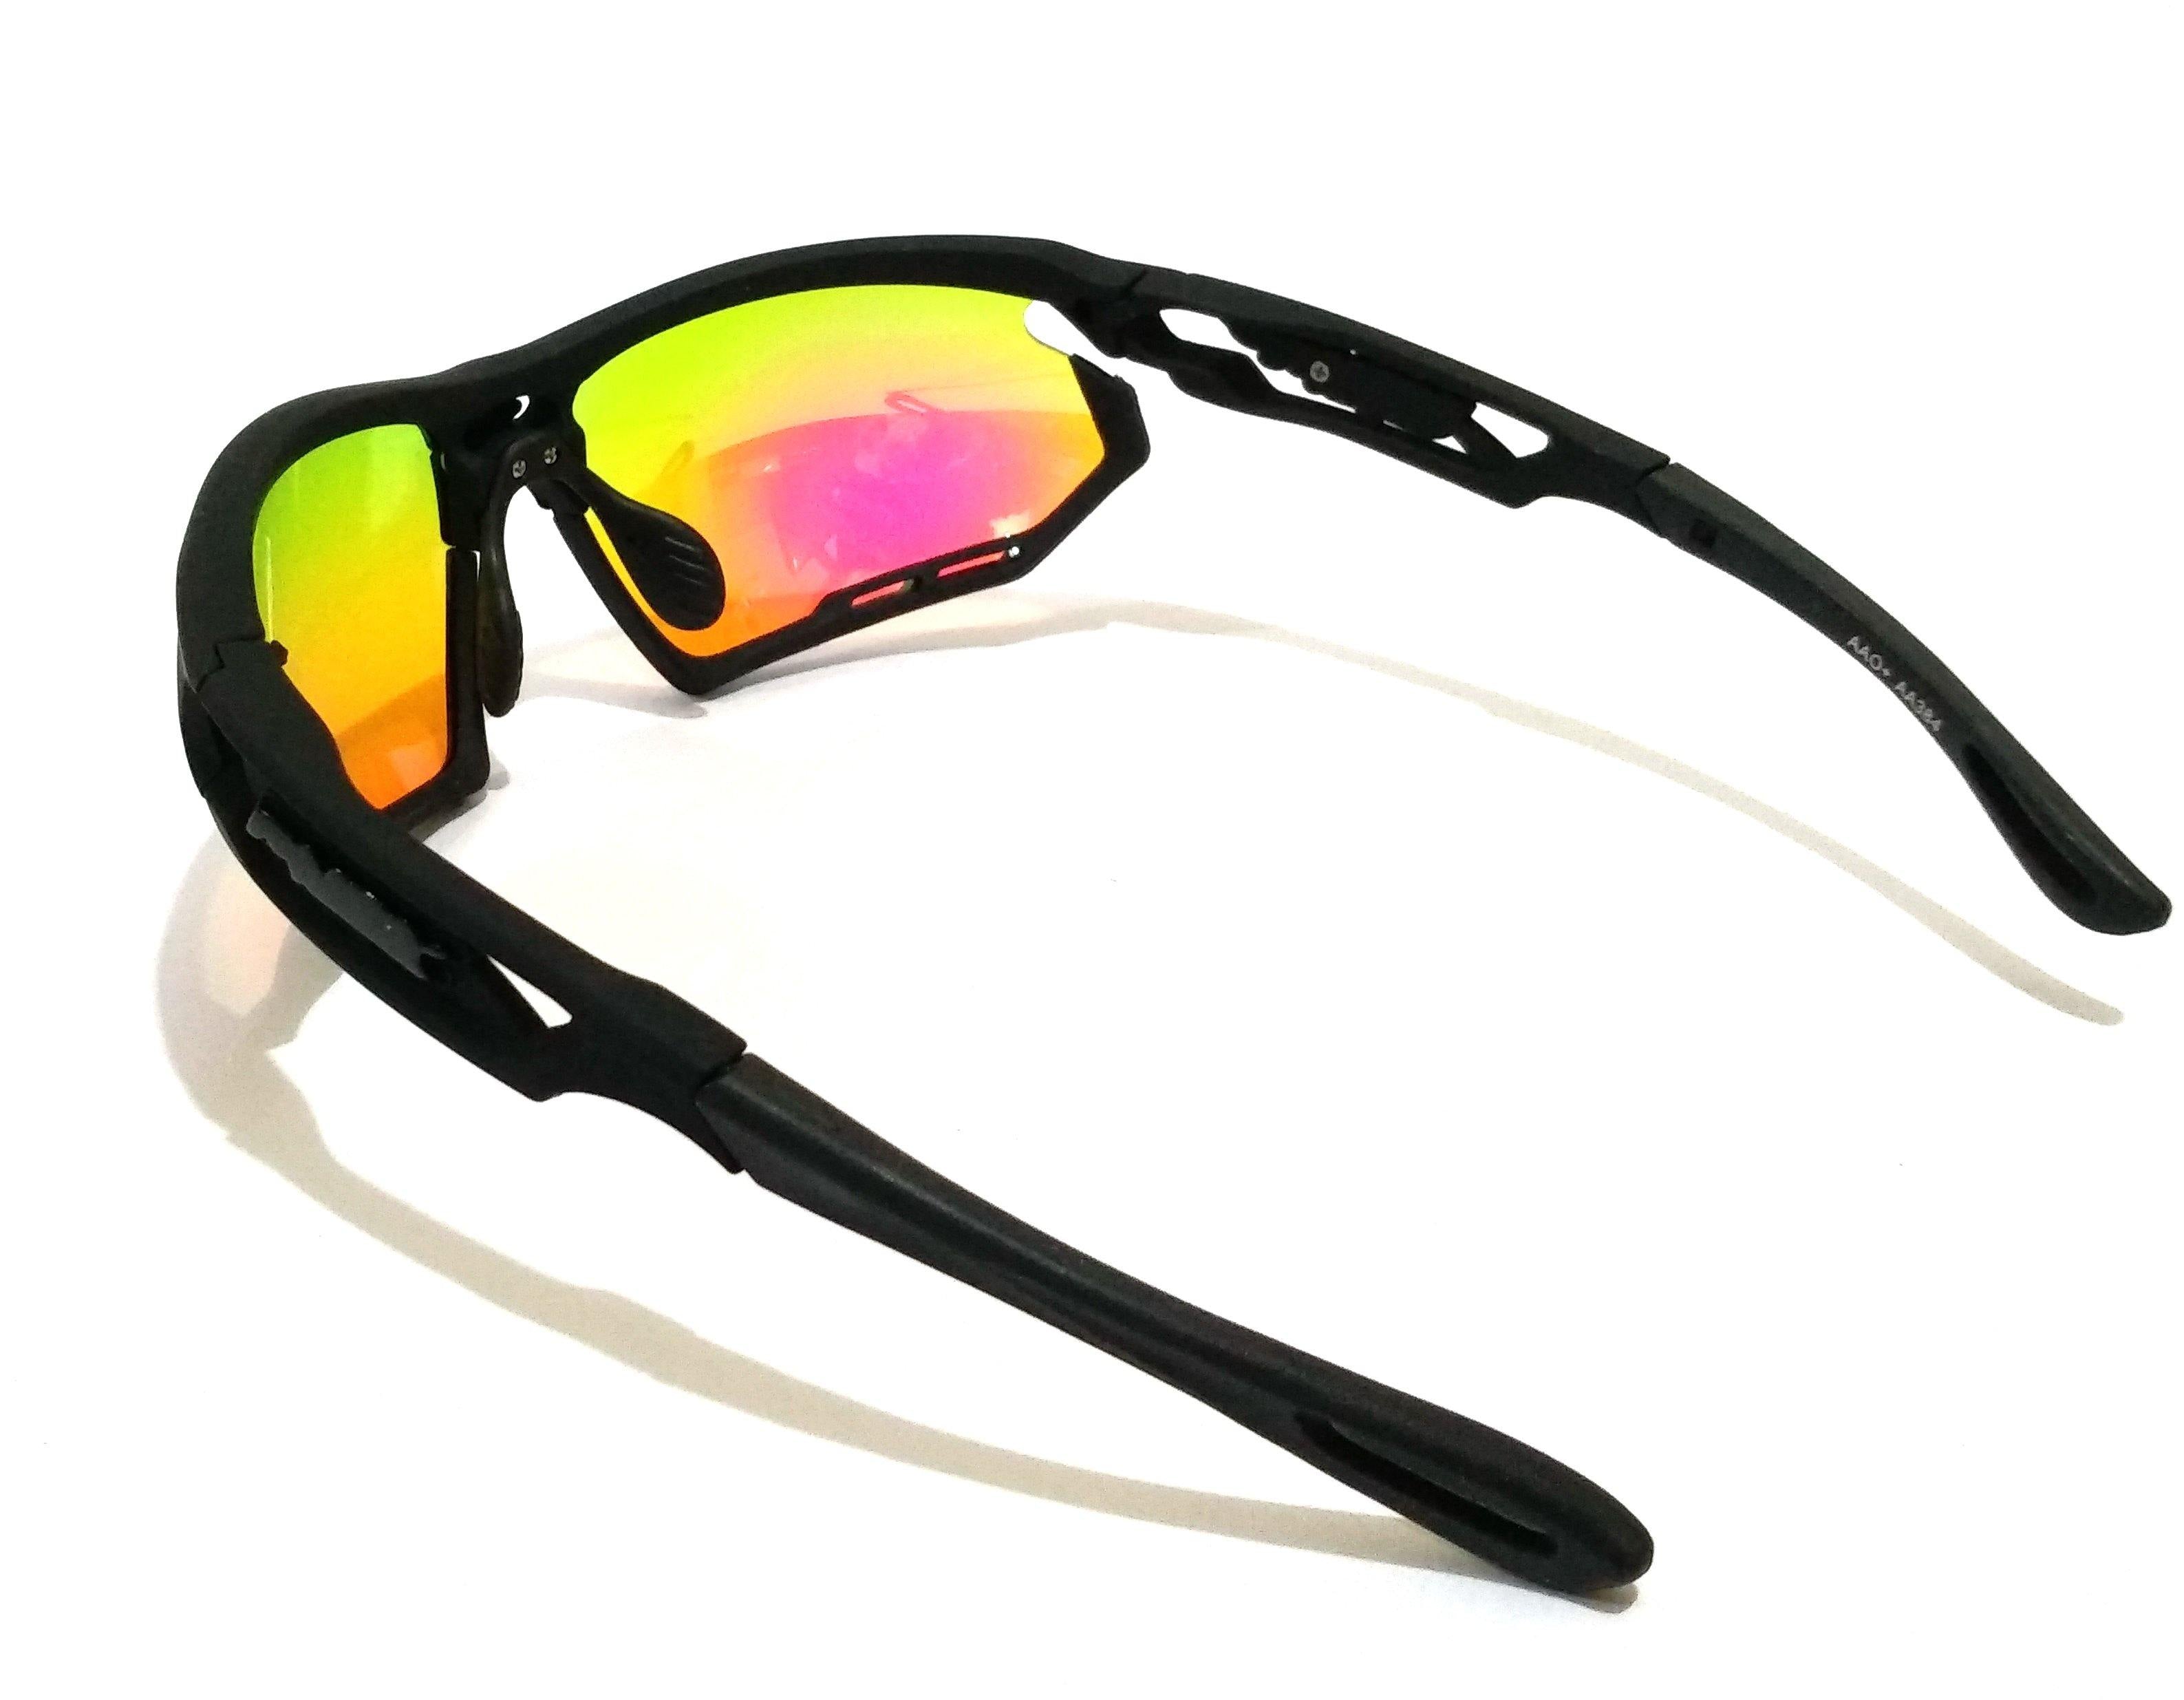 Buy Sports Sunglasses, Cricket Goggles Online at Best Prices - Lenskart